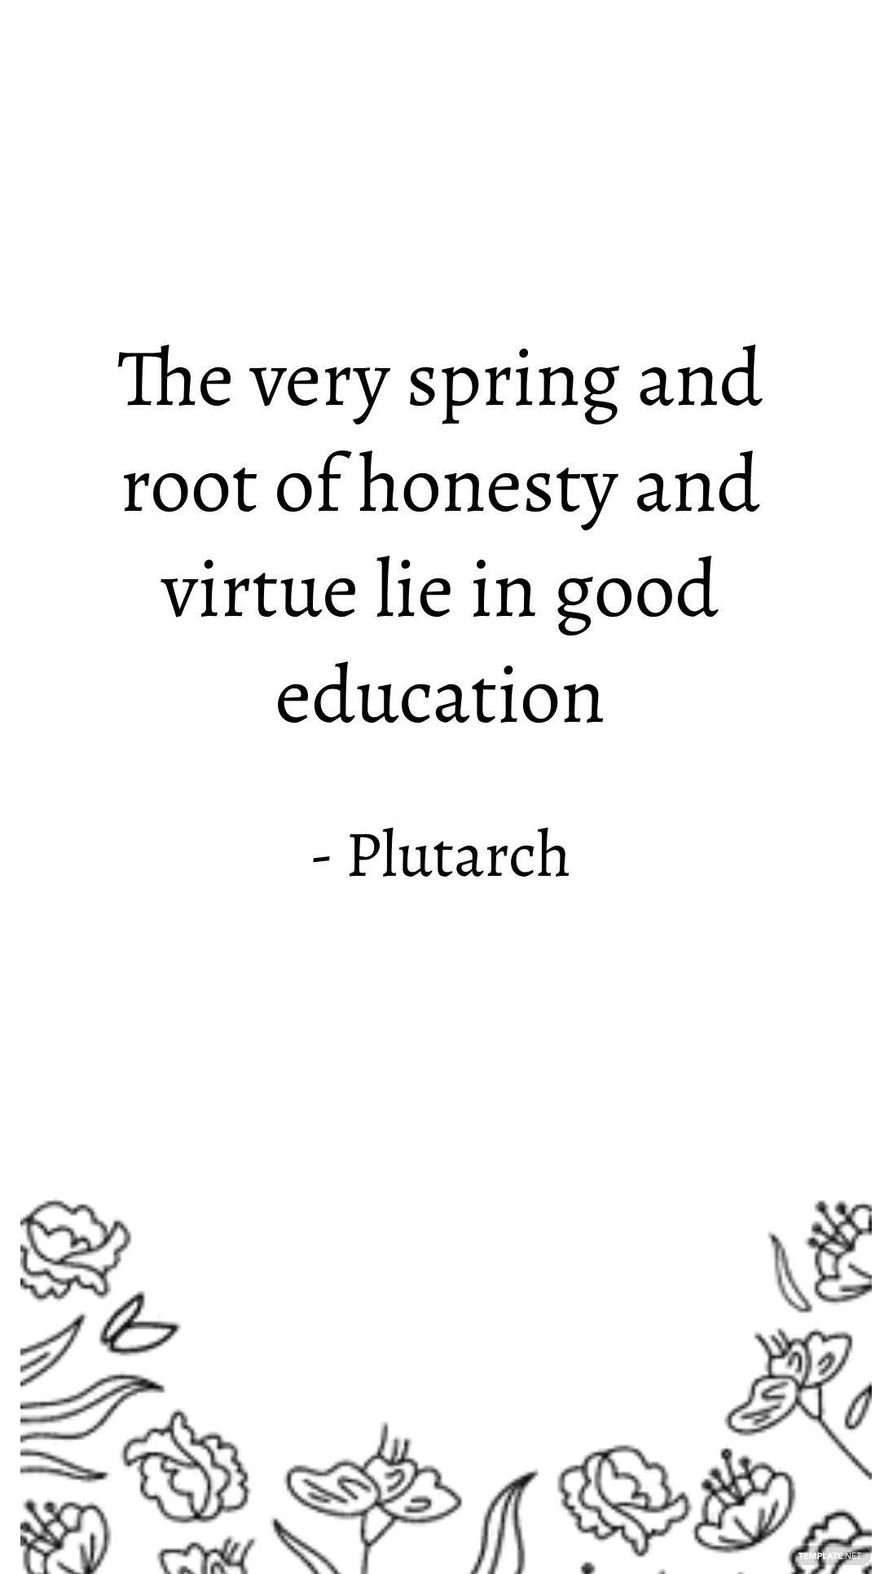 Free Plutarch - The very spring and root of honesty and virtue lie in good education in JPG